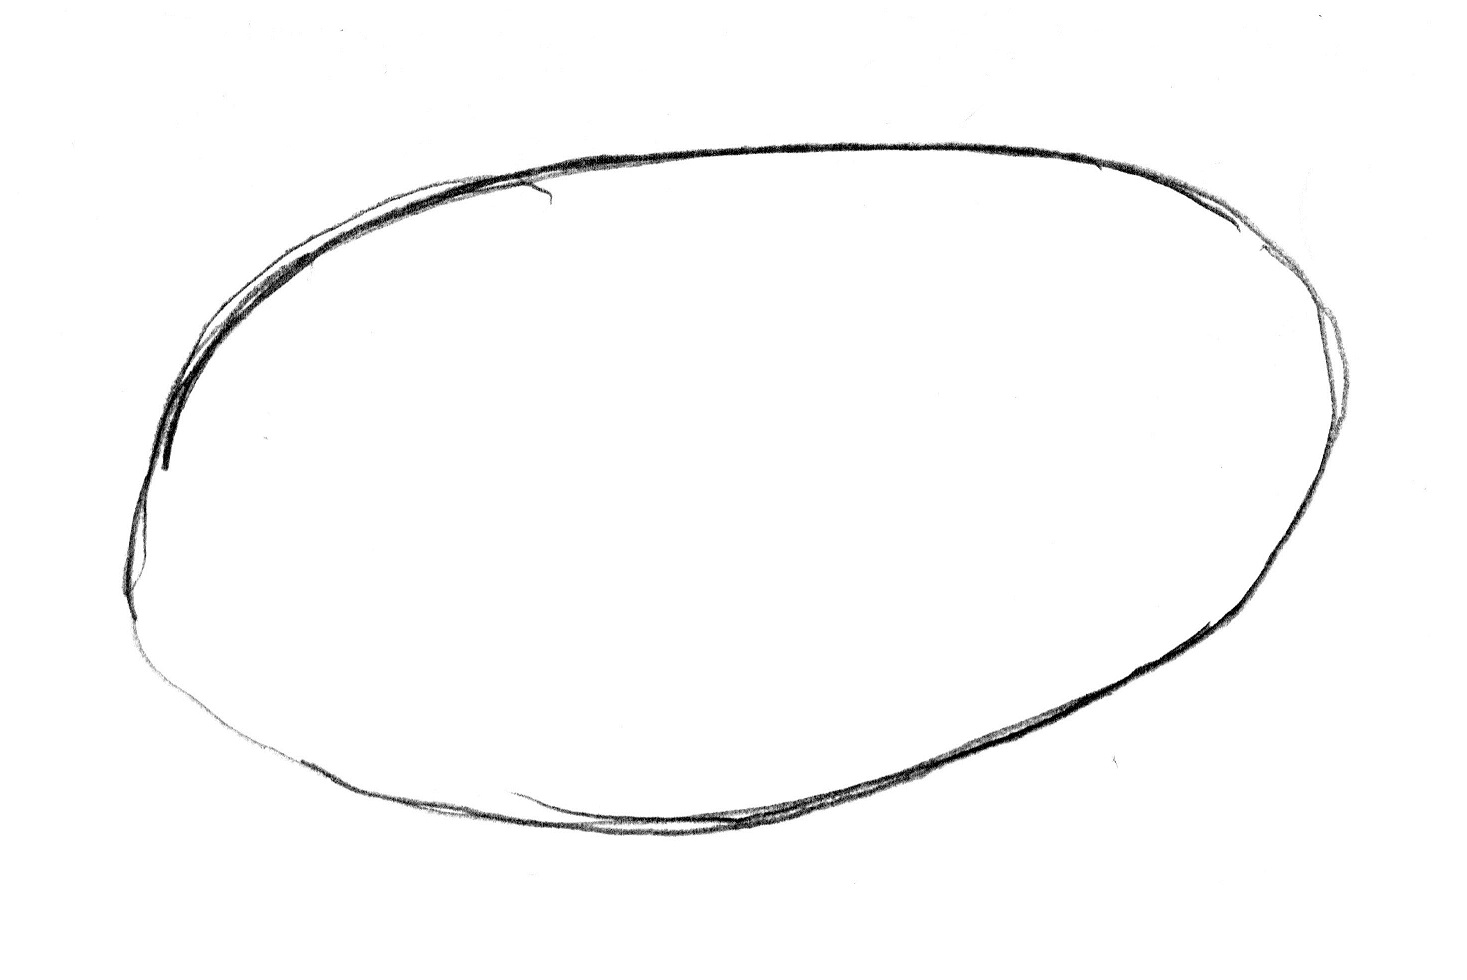 Drawn Shapes oval